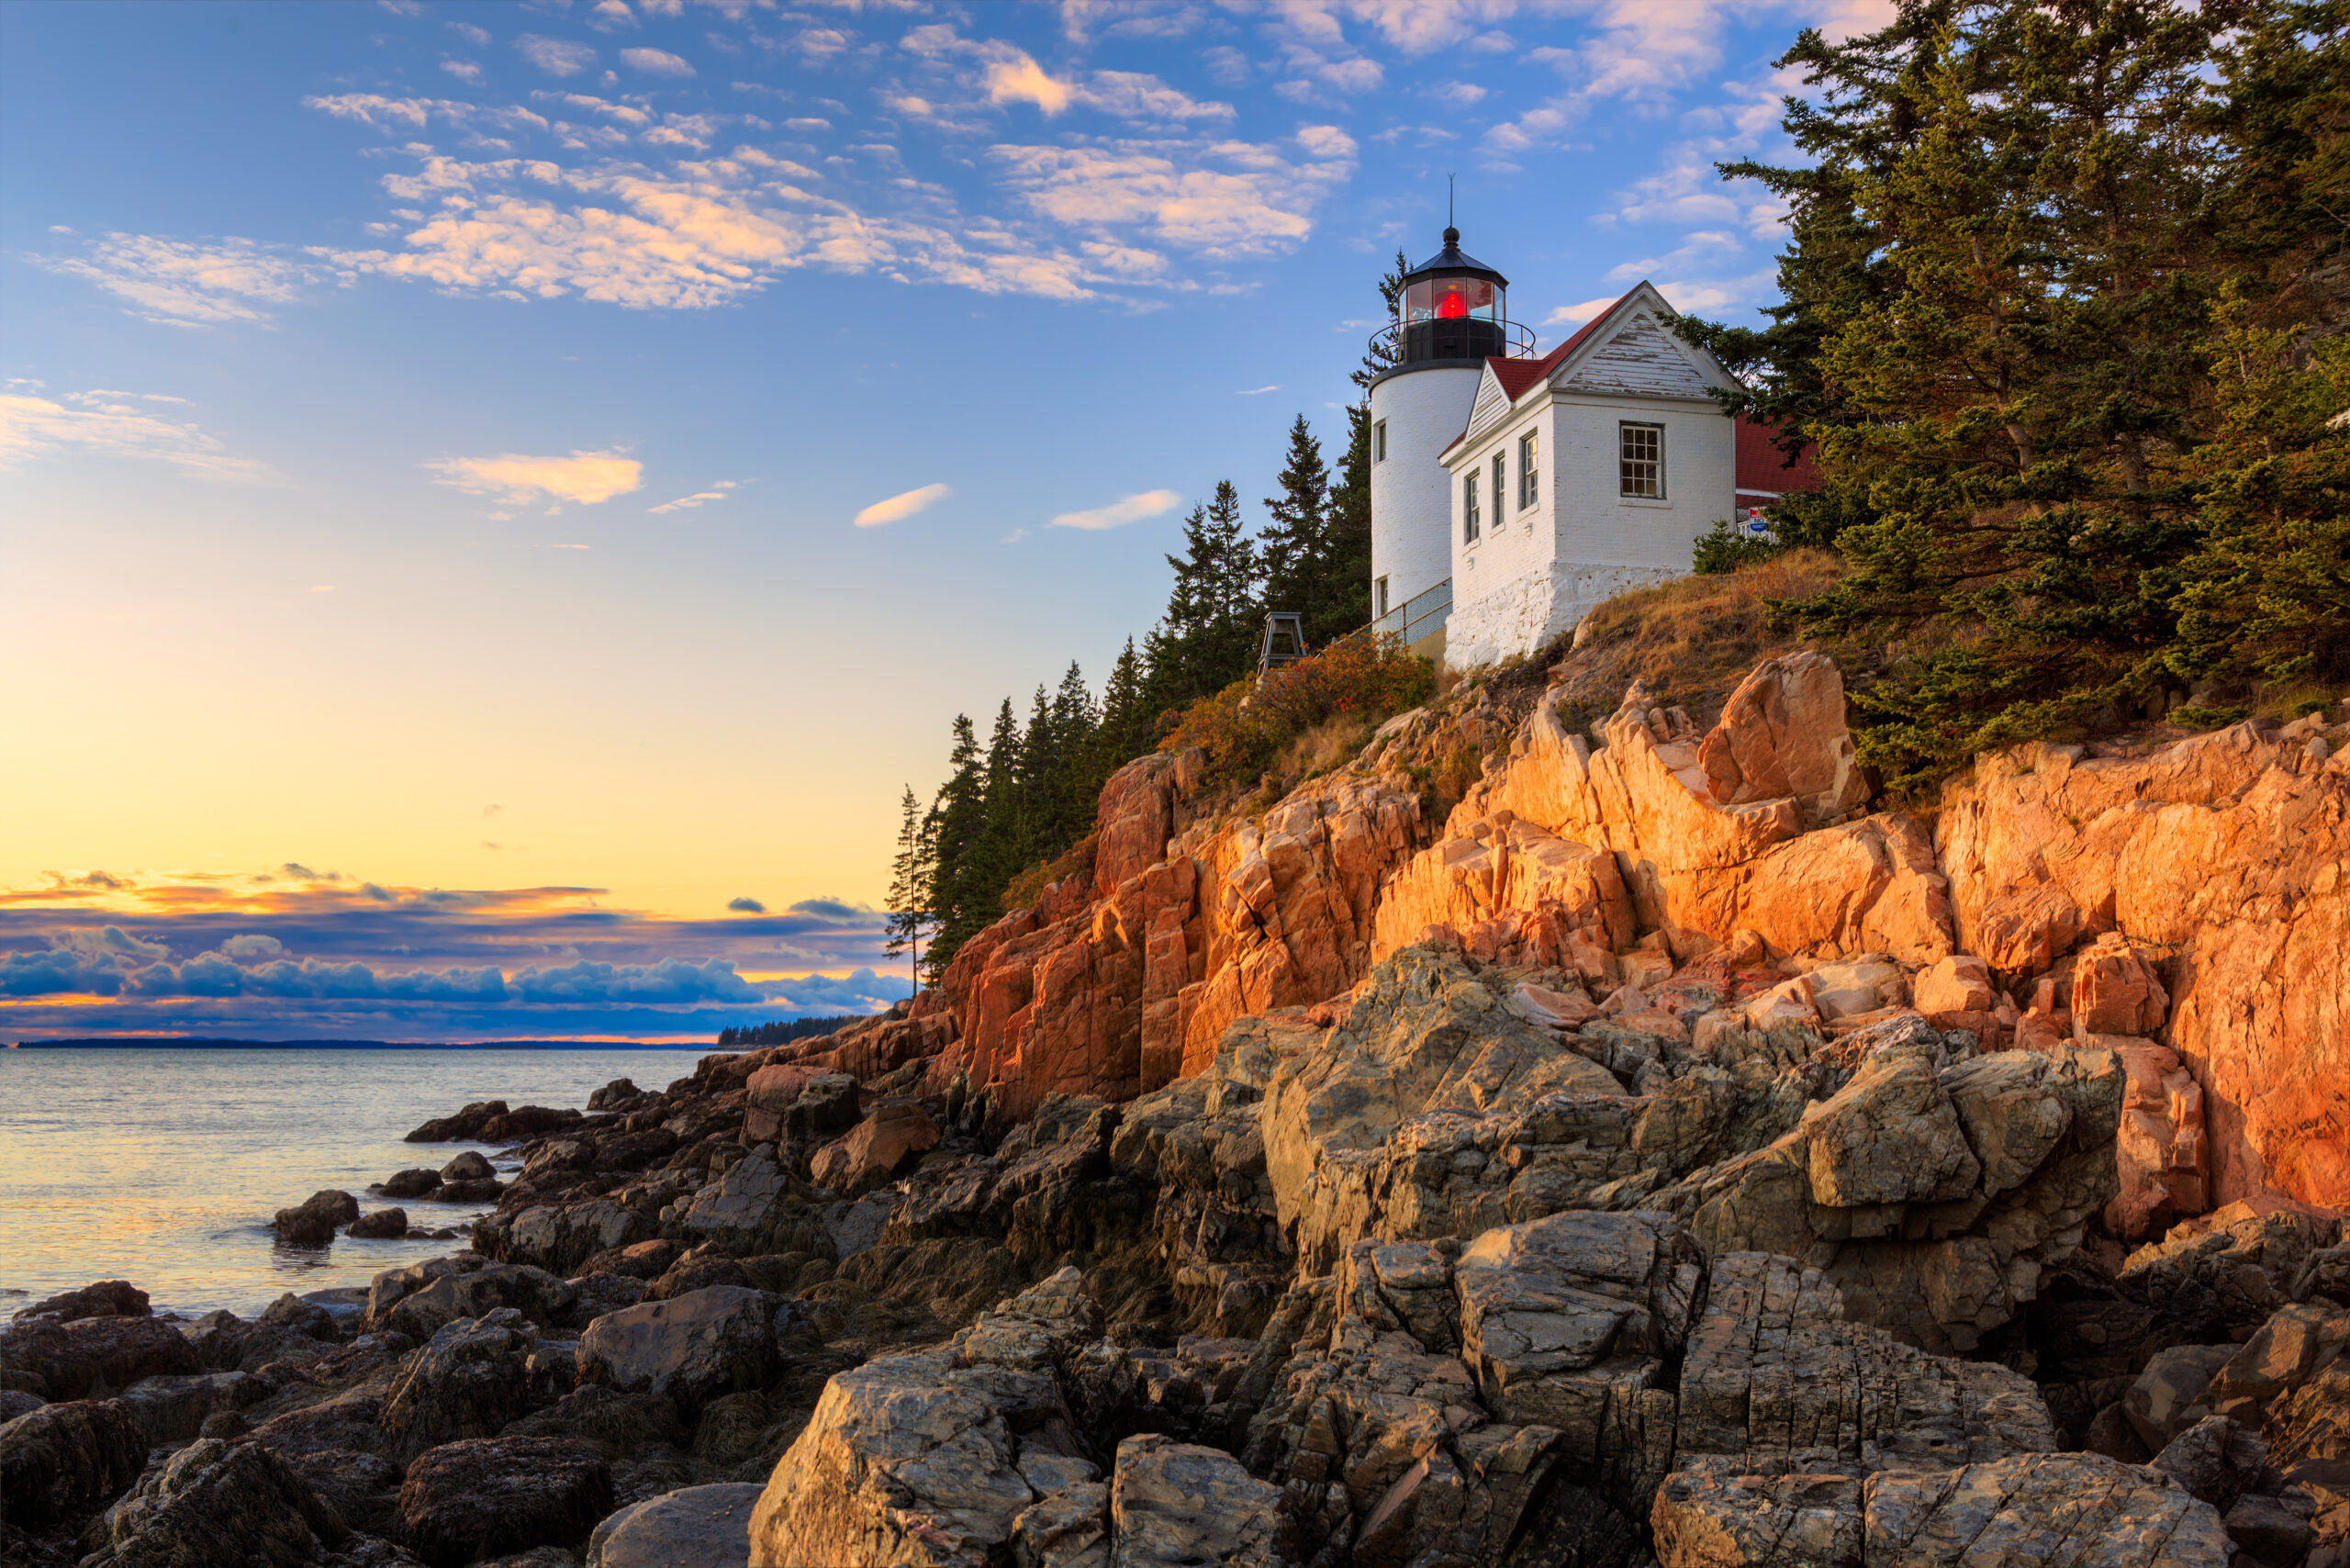 Sunset over Bass Harbor lighthouse in Acadia National Park.